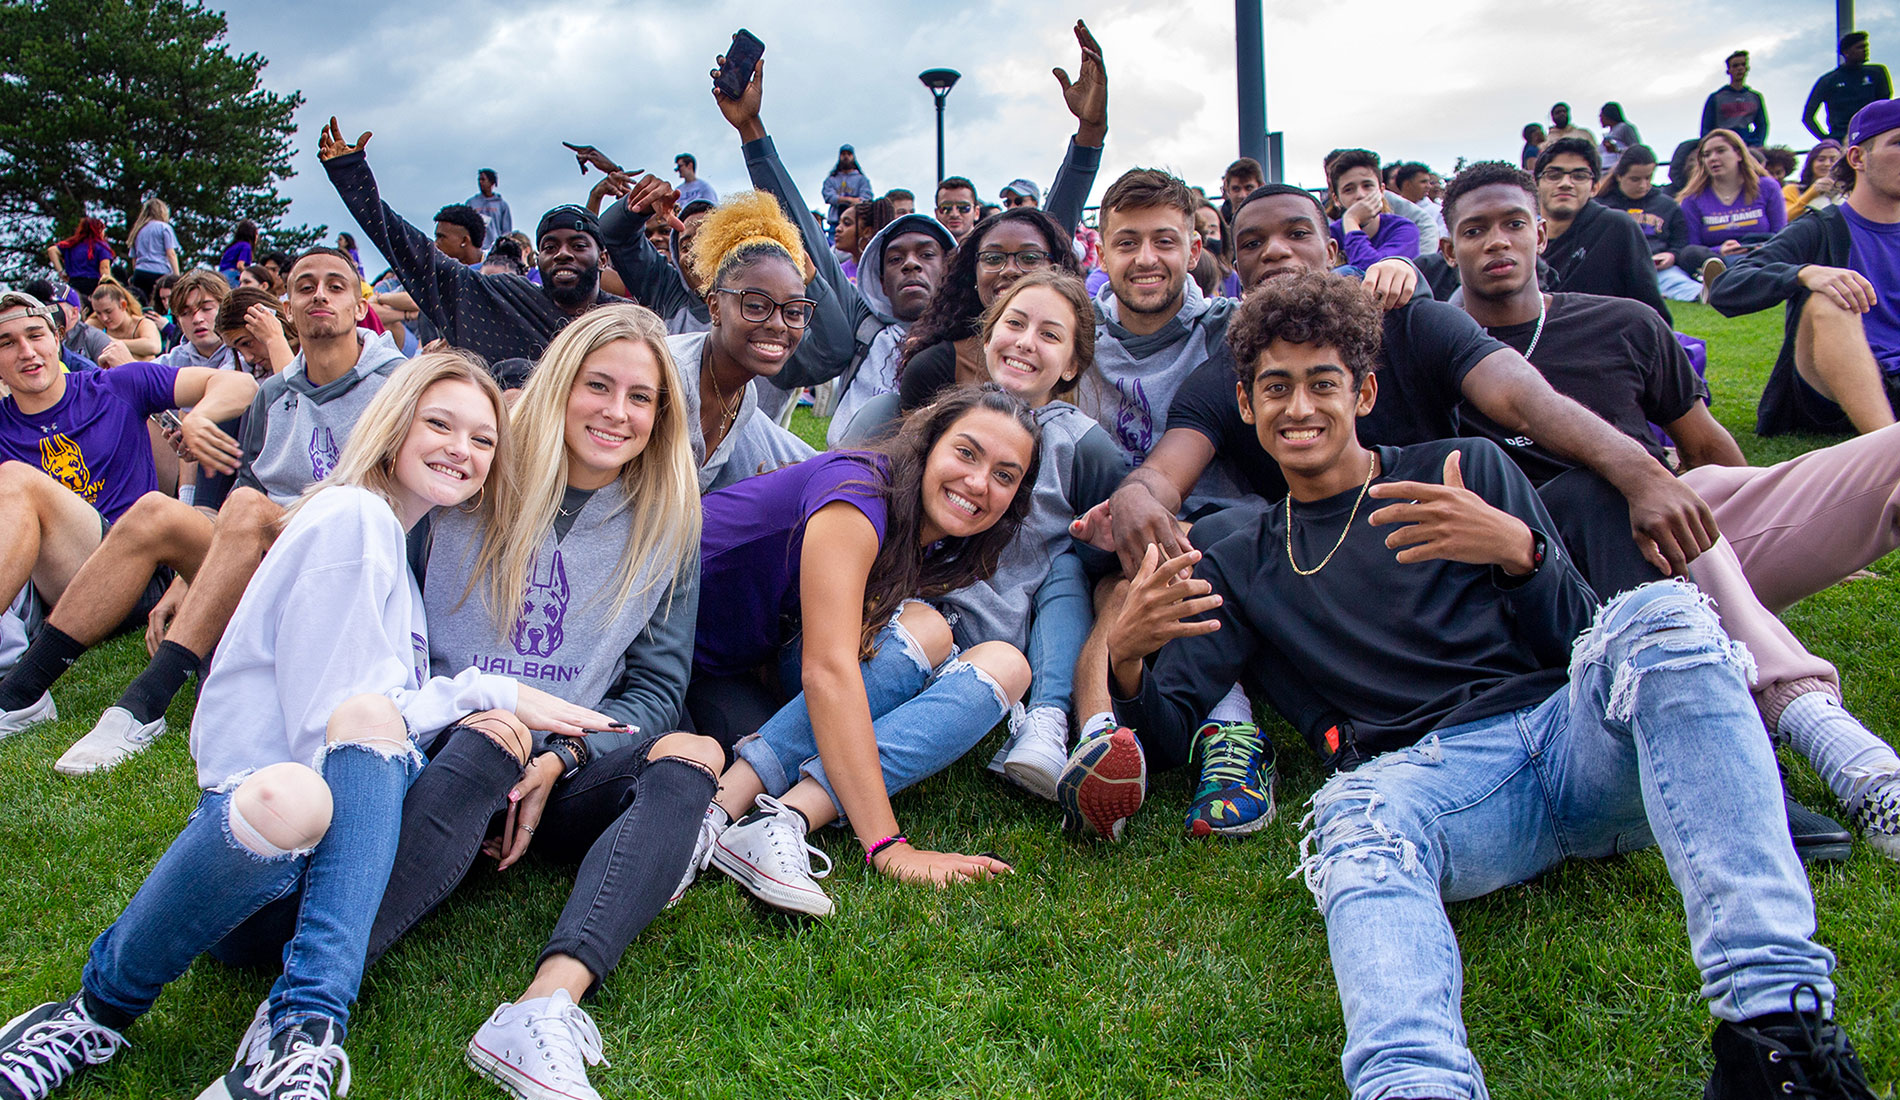 A group of students at a football game.